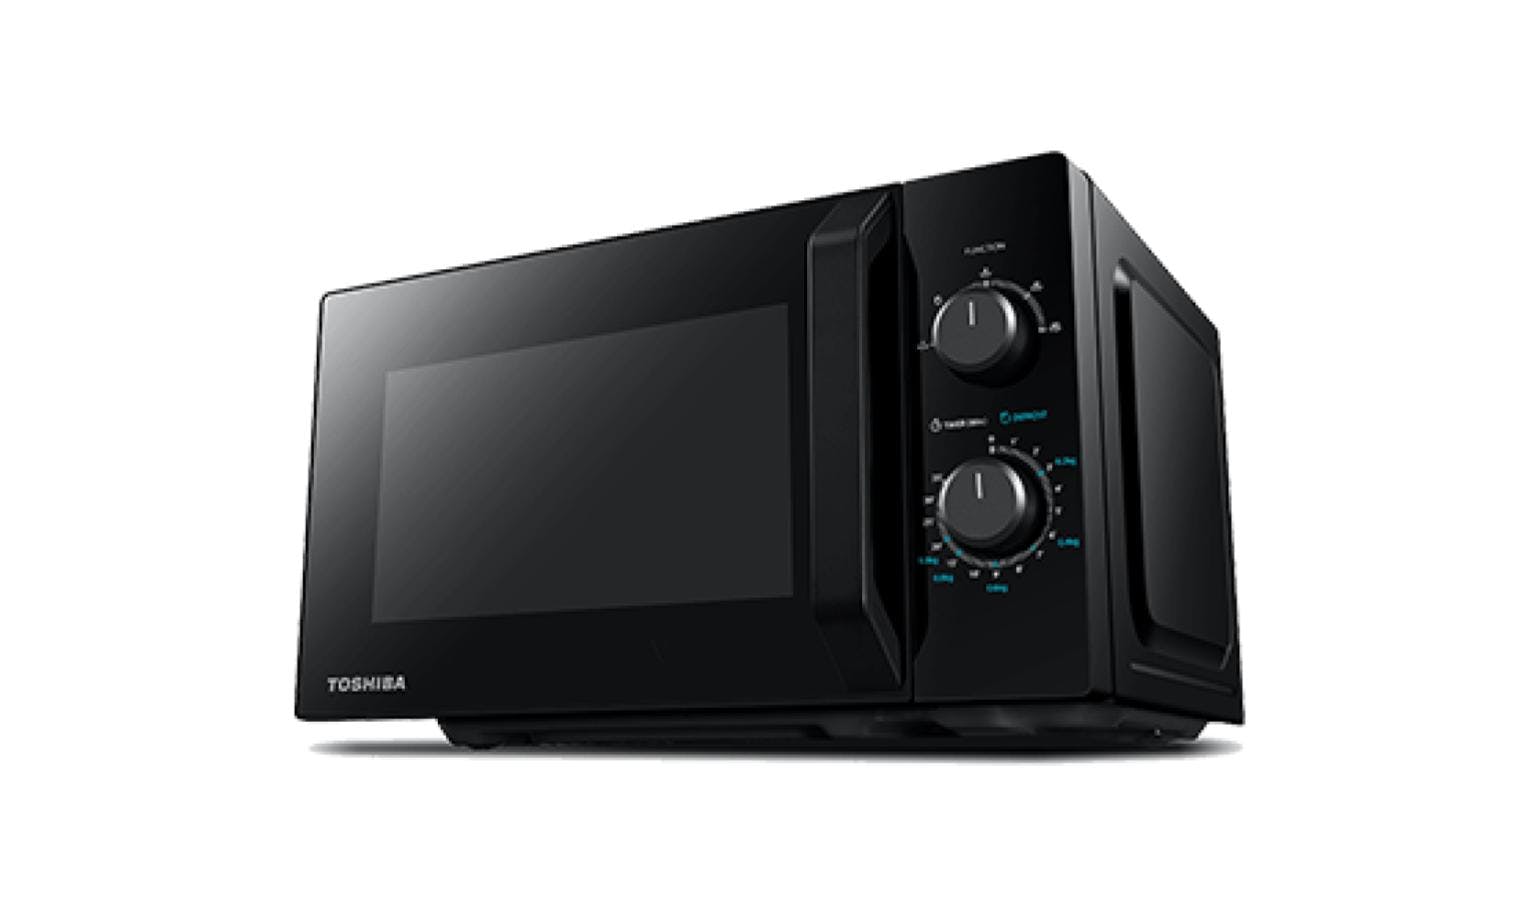 https://hnsgsfp.imgix.net/9/images/detailed/83/toshiba-21l-microwave-oven-black-mm21pf_3.jpg?fit=fill&bg=0FFF&w=1534&h=900&auto=format,compress